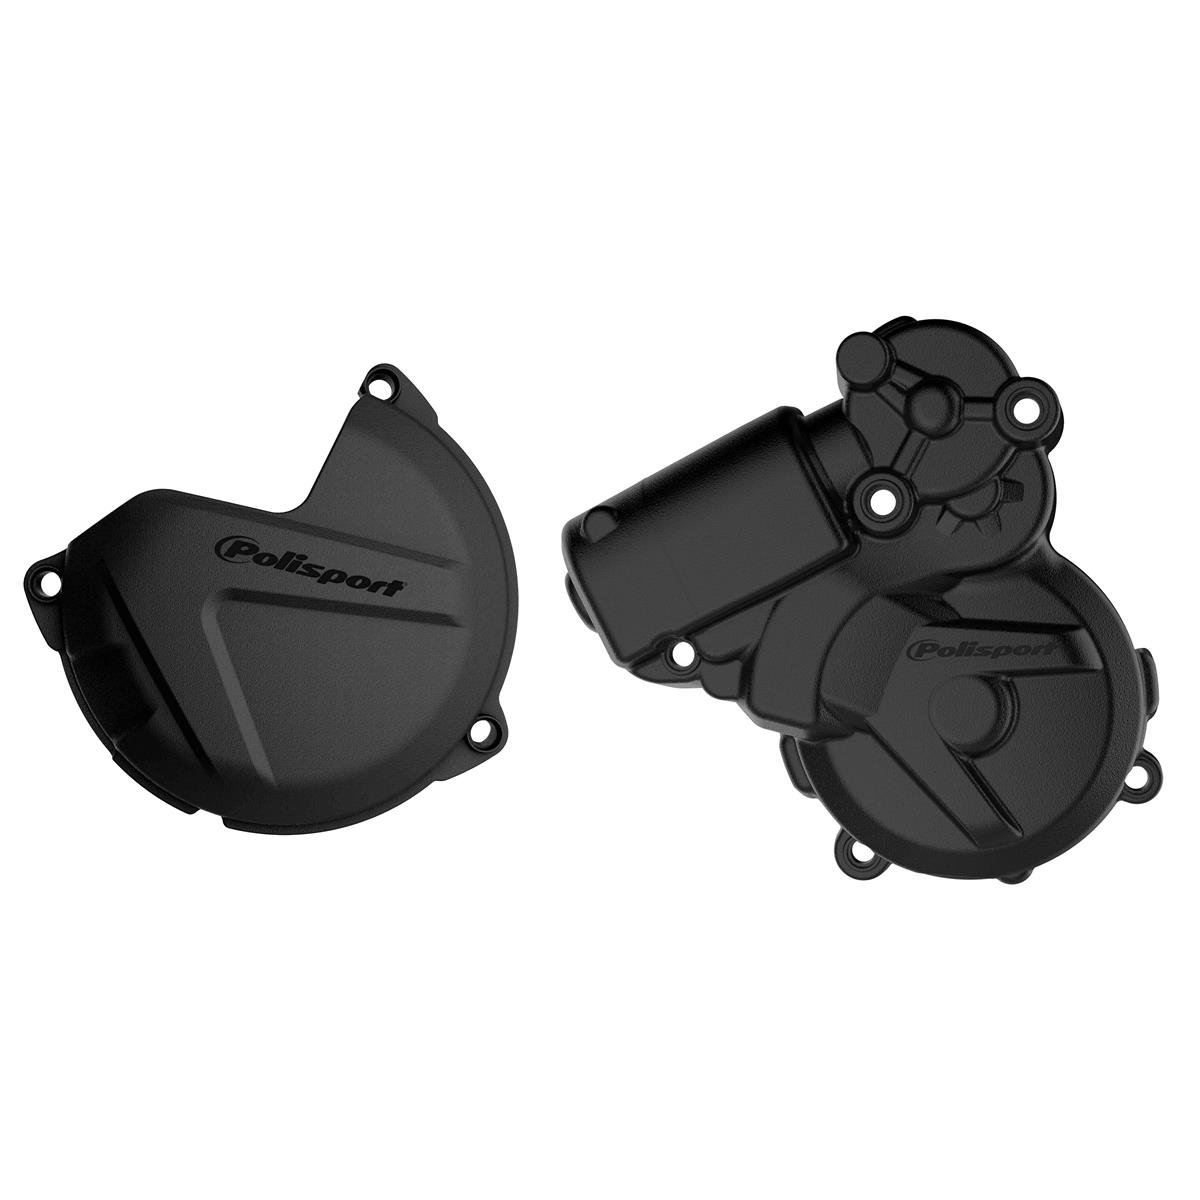 Polisport Clutch/Ignition Cover Protection  KTM EXC 250/300 13-16, Black